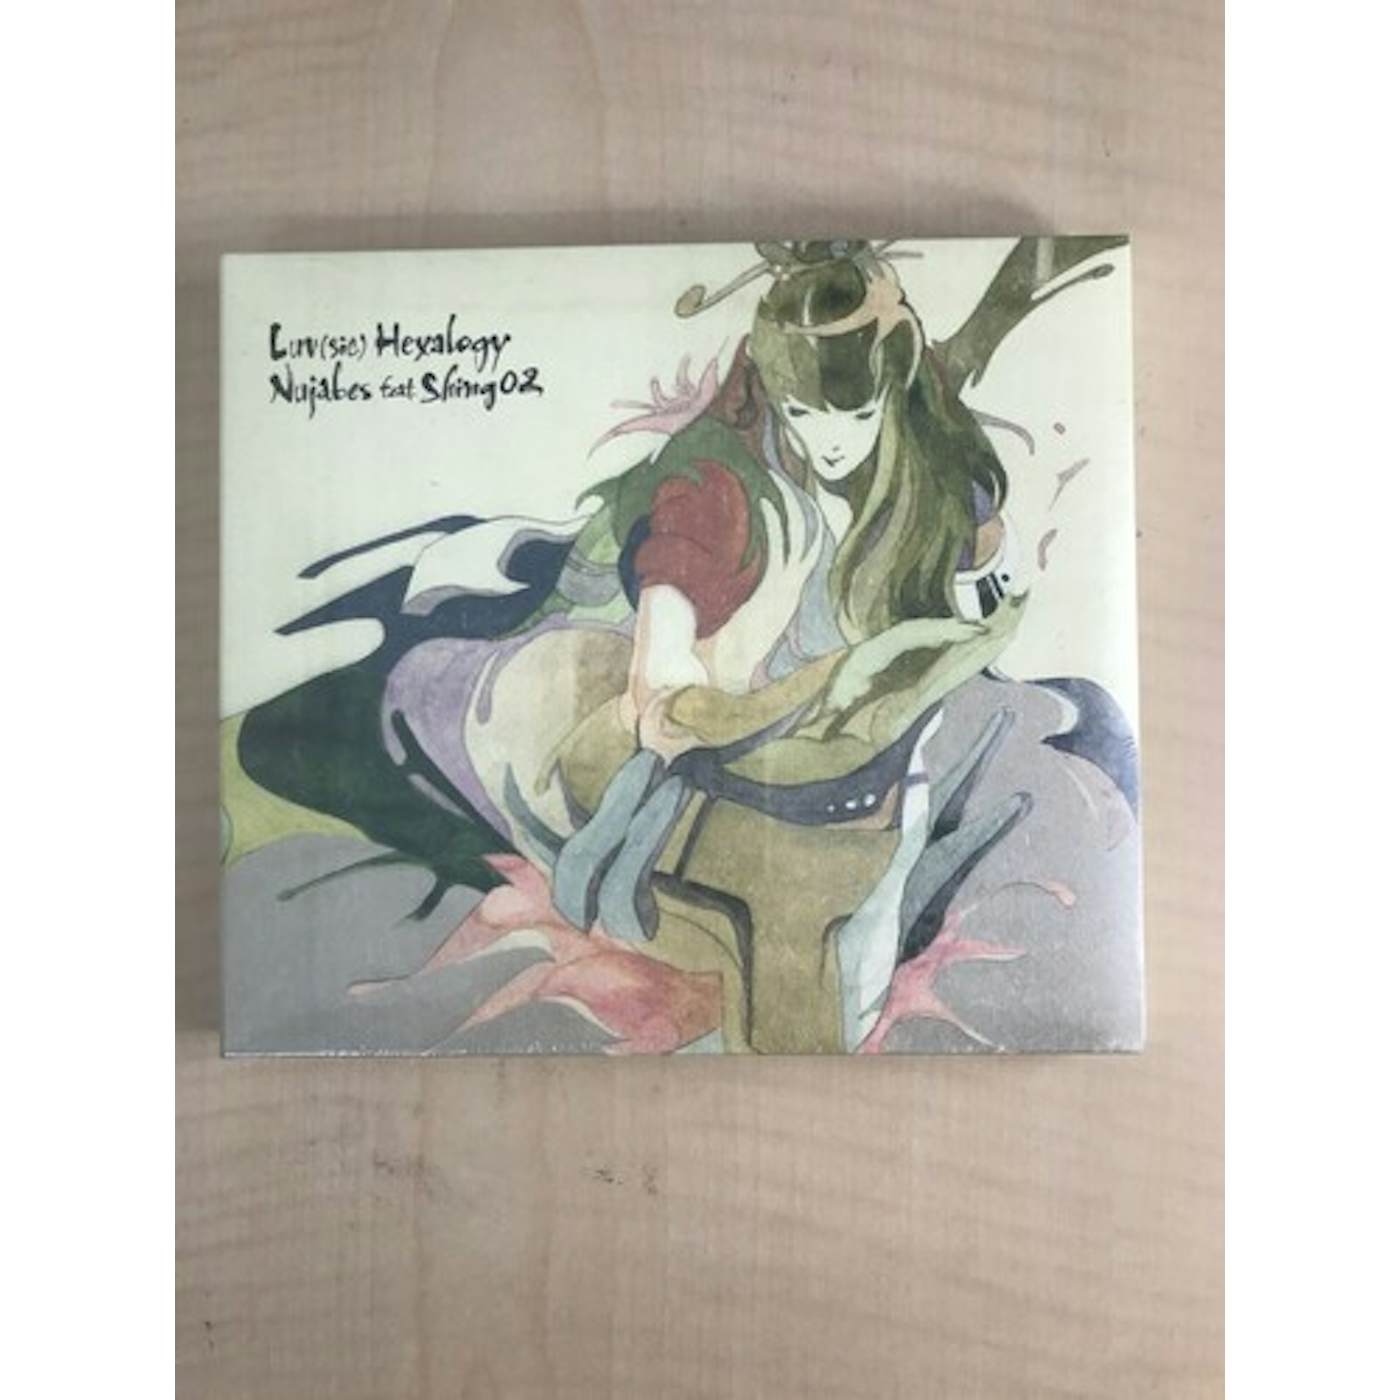 Nujabes LUV(SIC) HEXALOGY CD